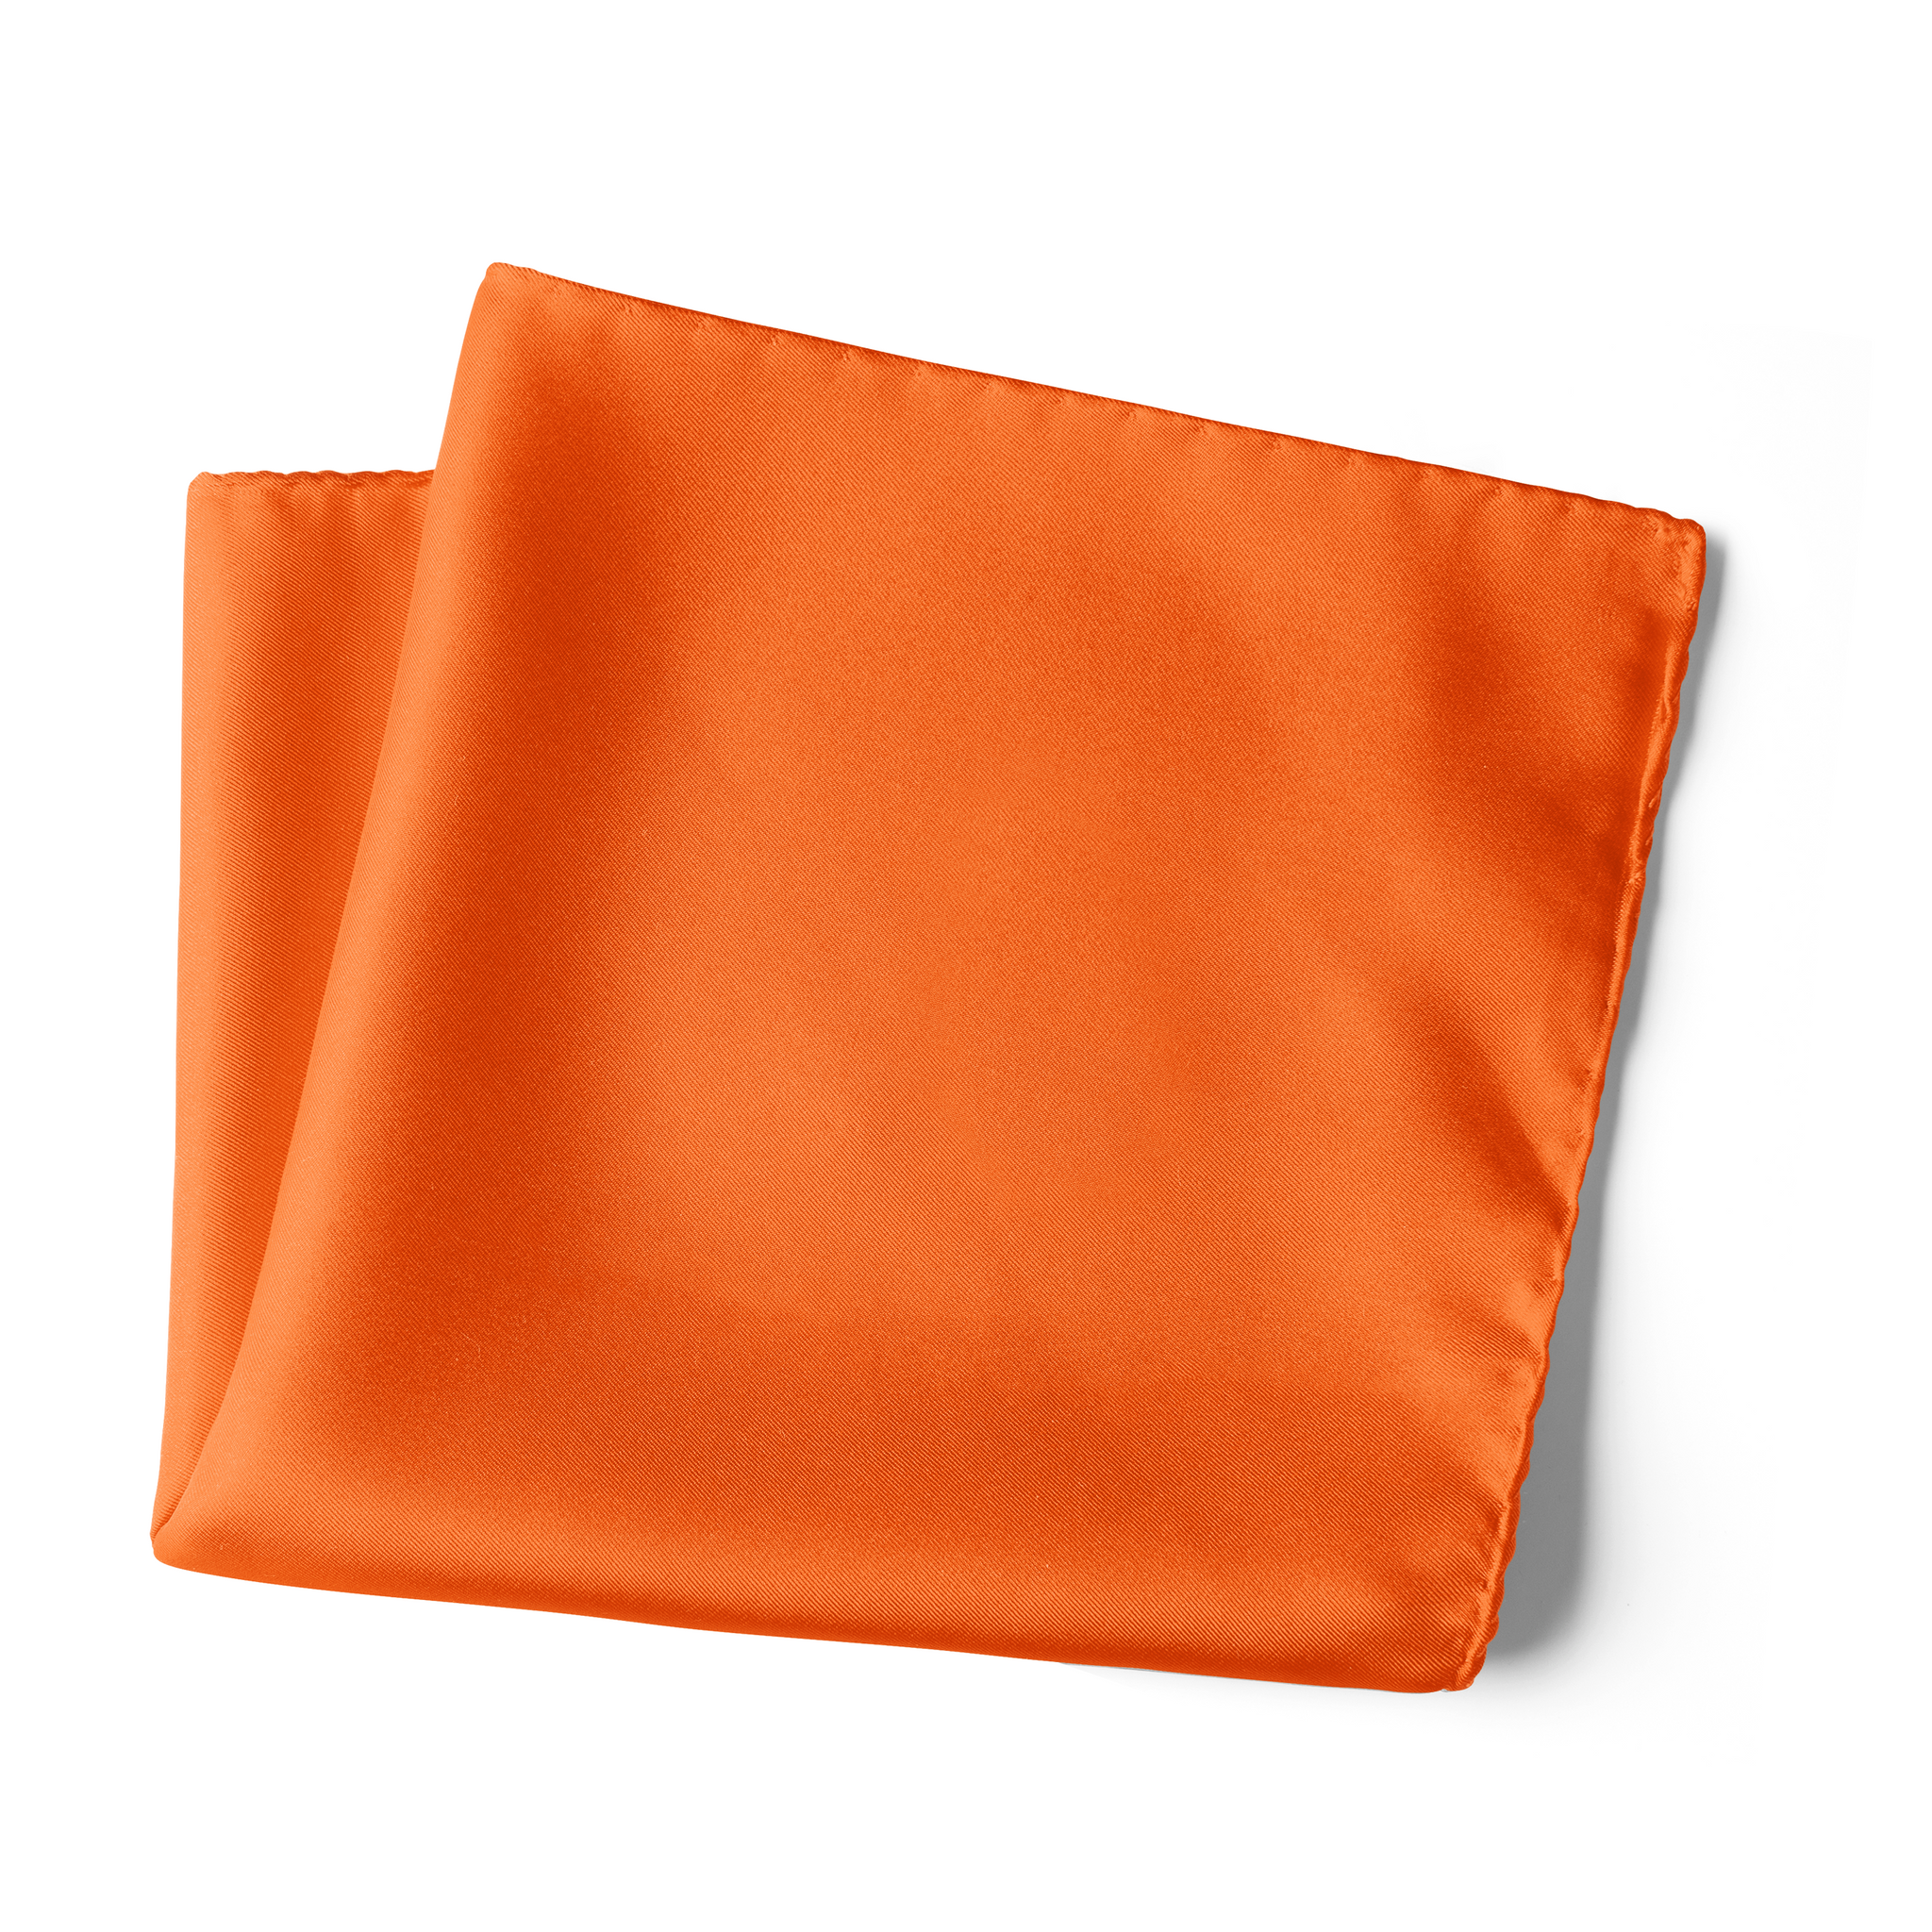 Chokore Flame Colour Pure Silk Pocket Square, from the Solids Line